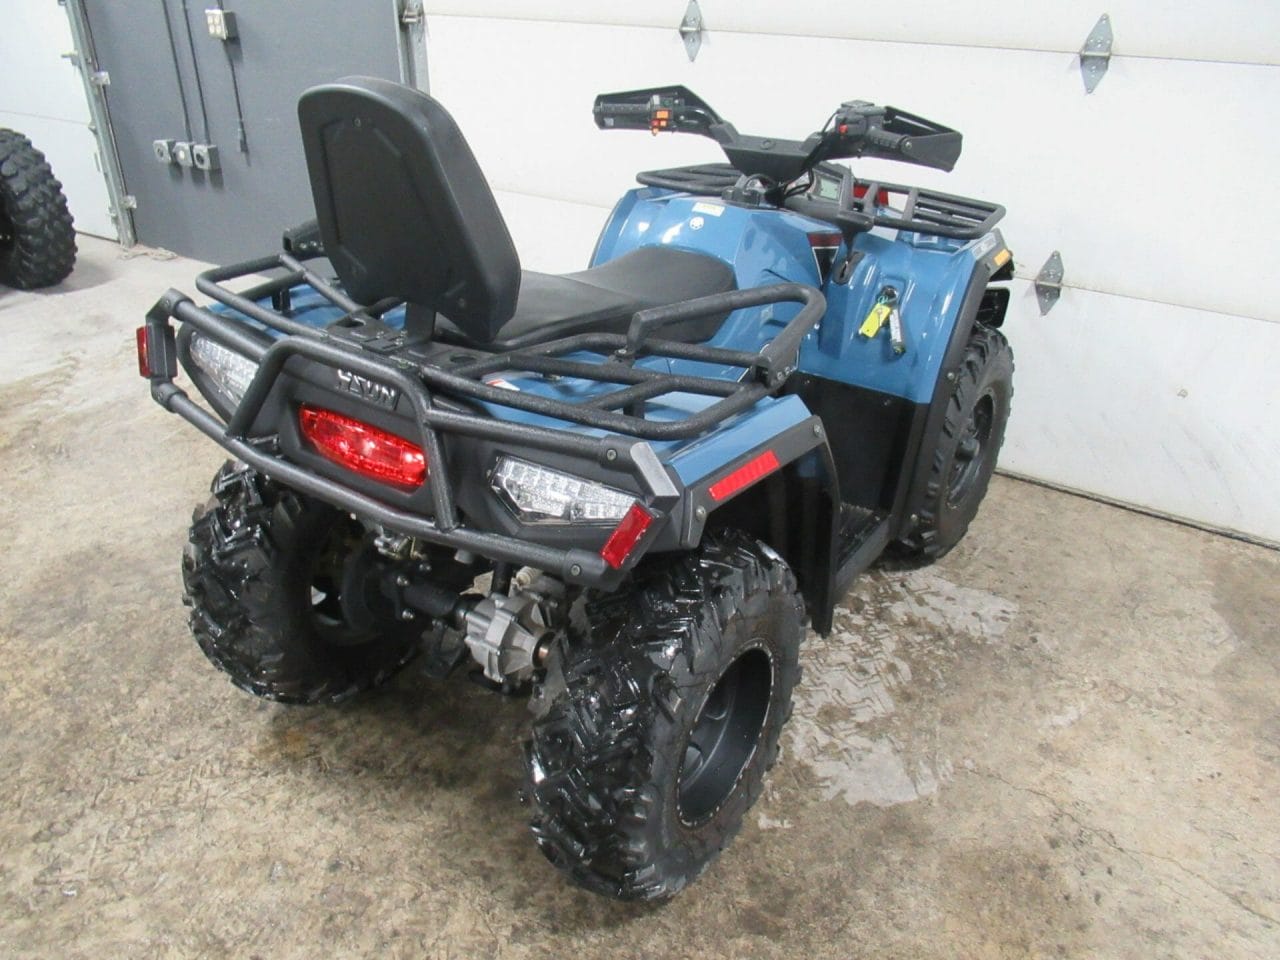 2022 Hisun Tactic 400 2-up 4×4 * New * Come with 2 Year Warranty’s * Payments Starting $130 a Month OAC *